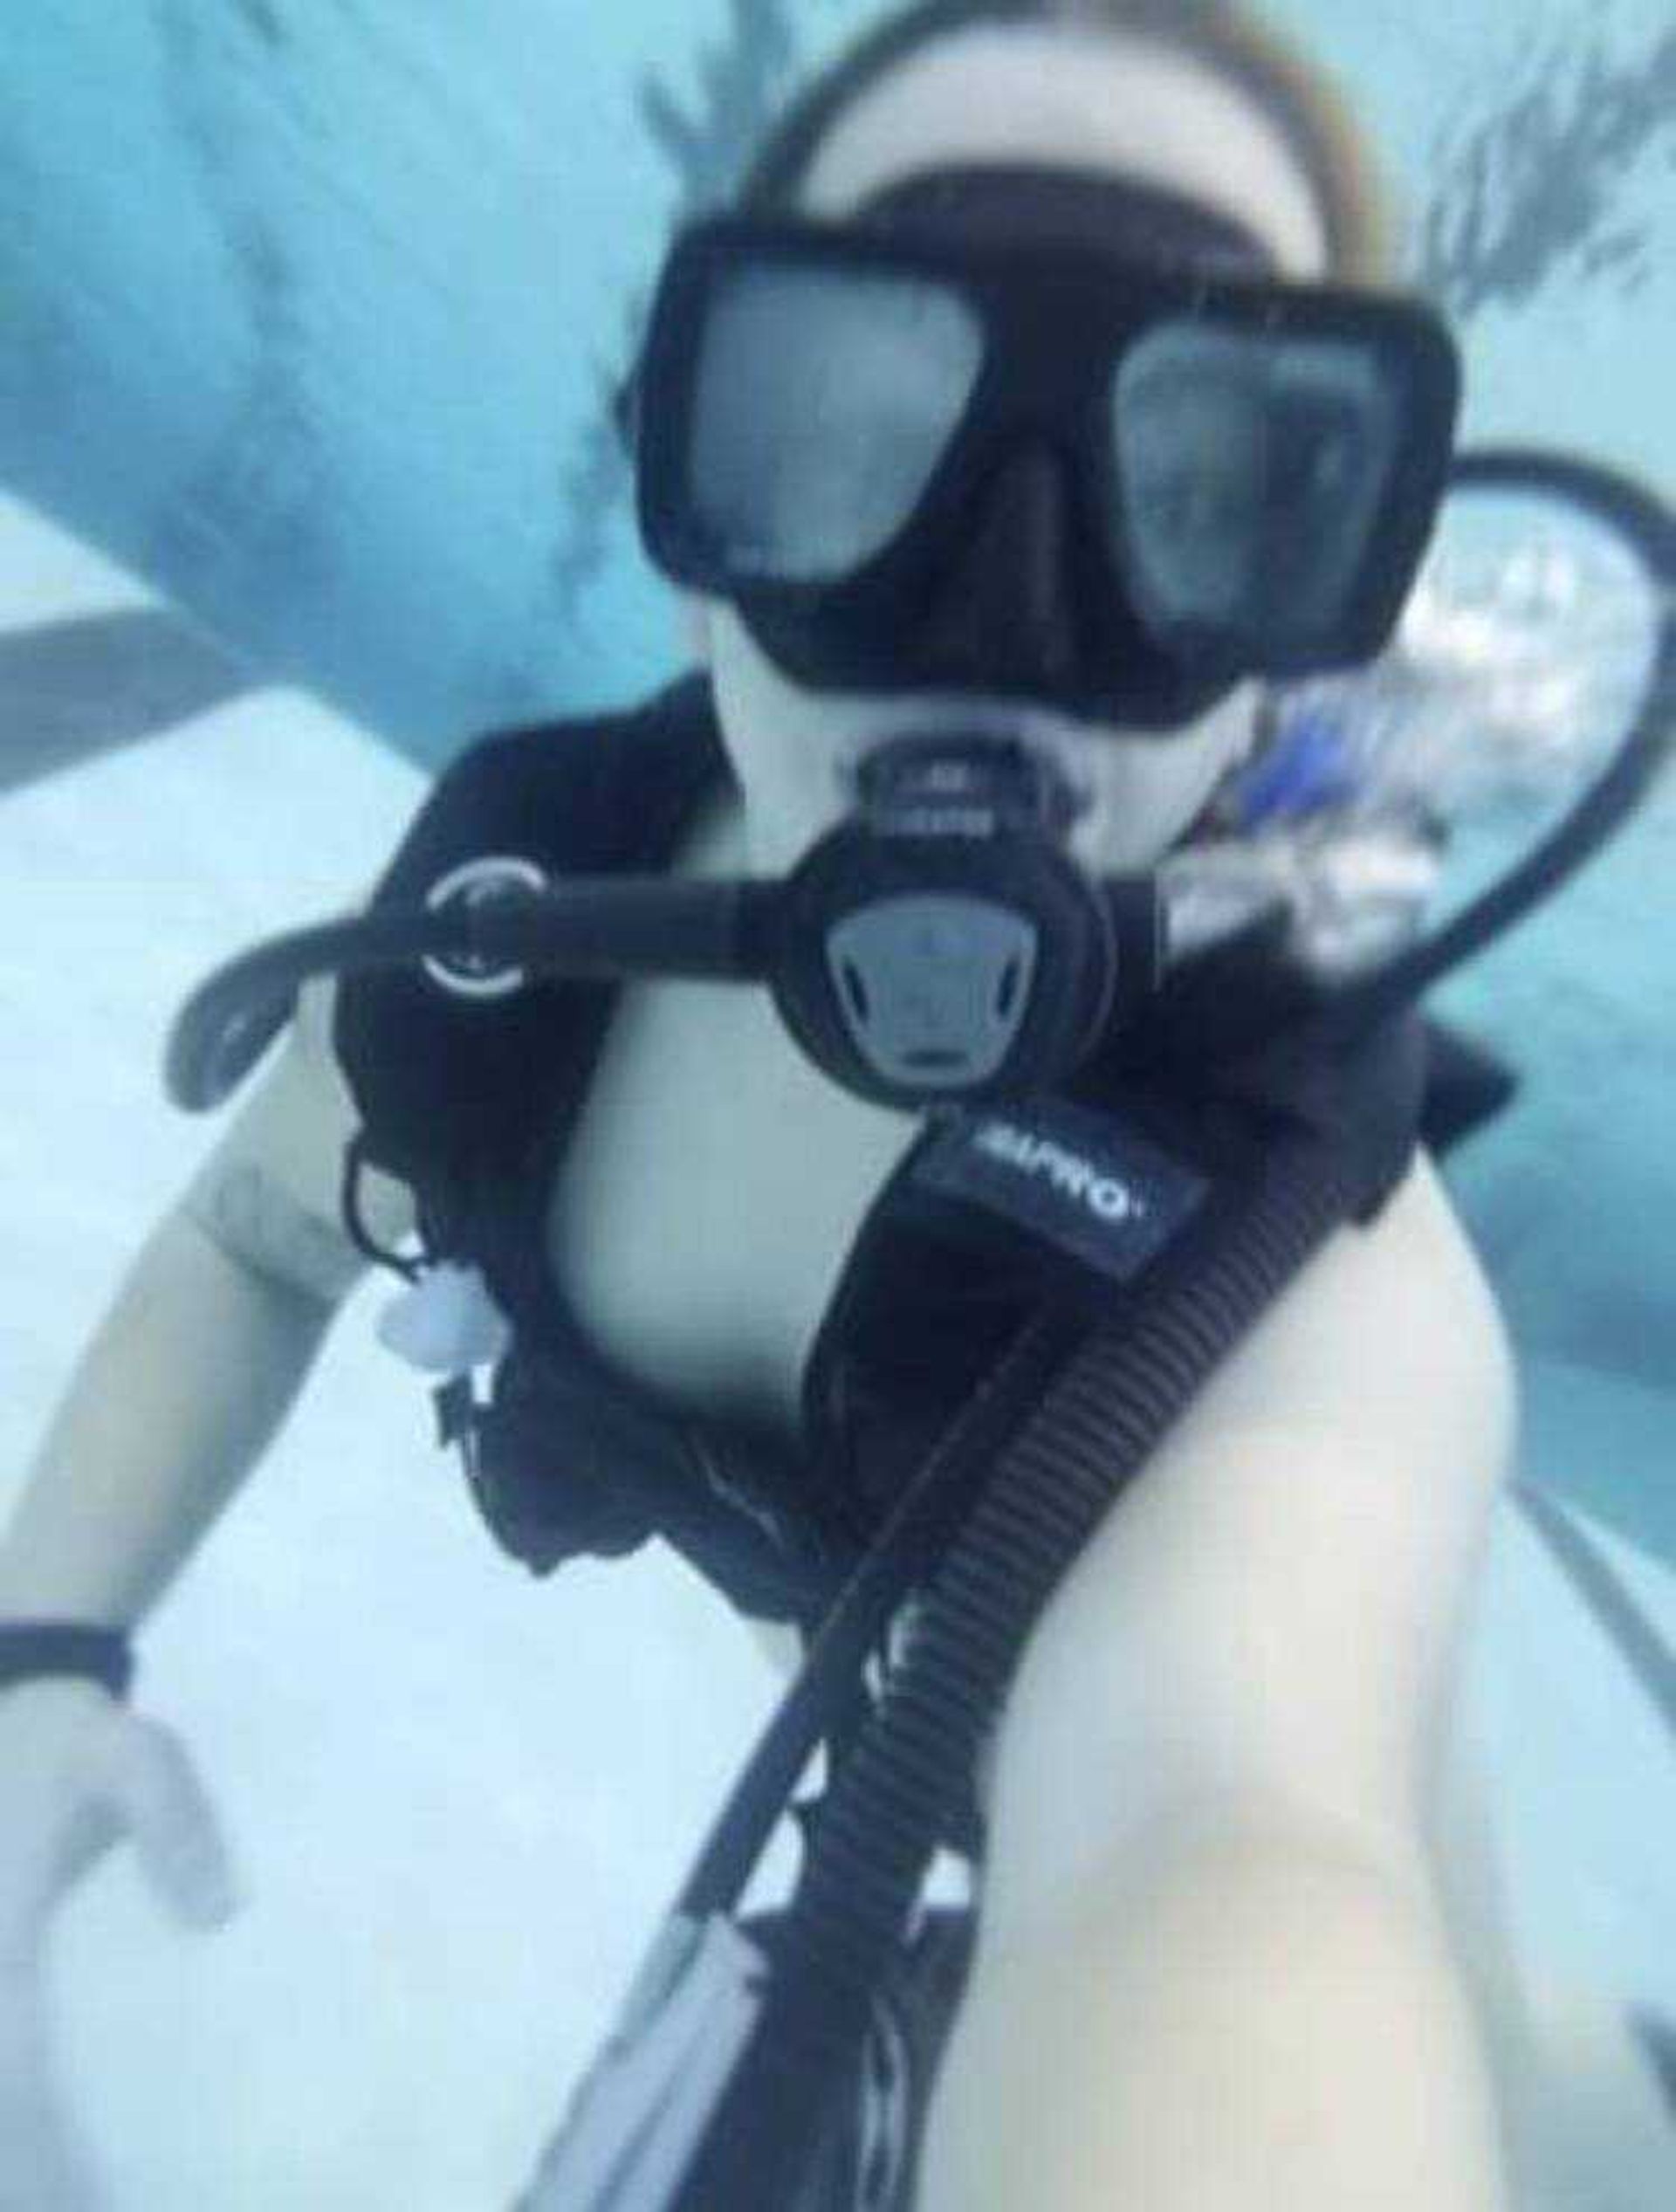 Tori Wright posing for a selfie while scuba diving at the Student Aquatic Center.